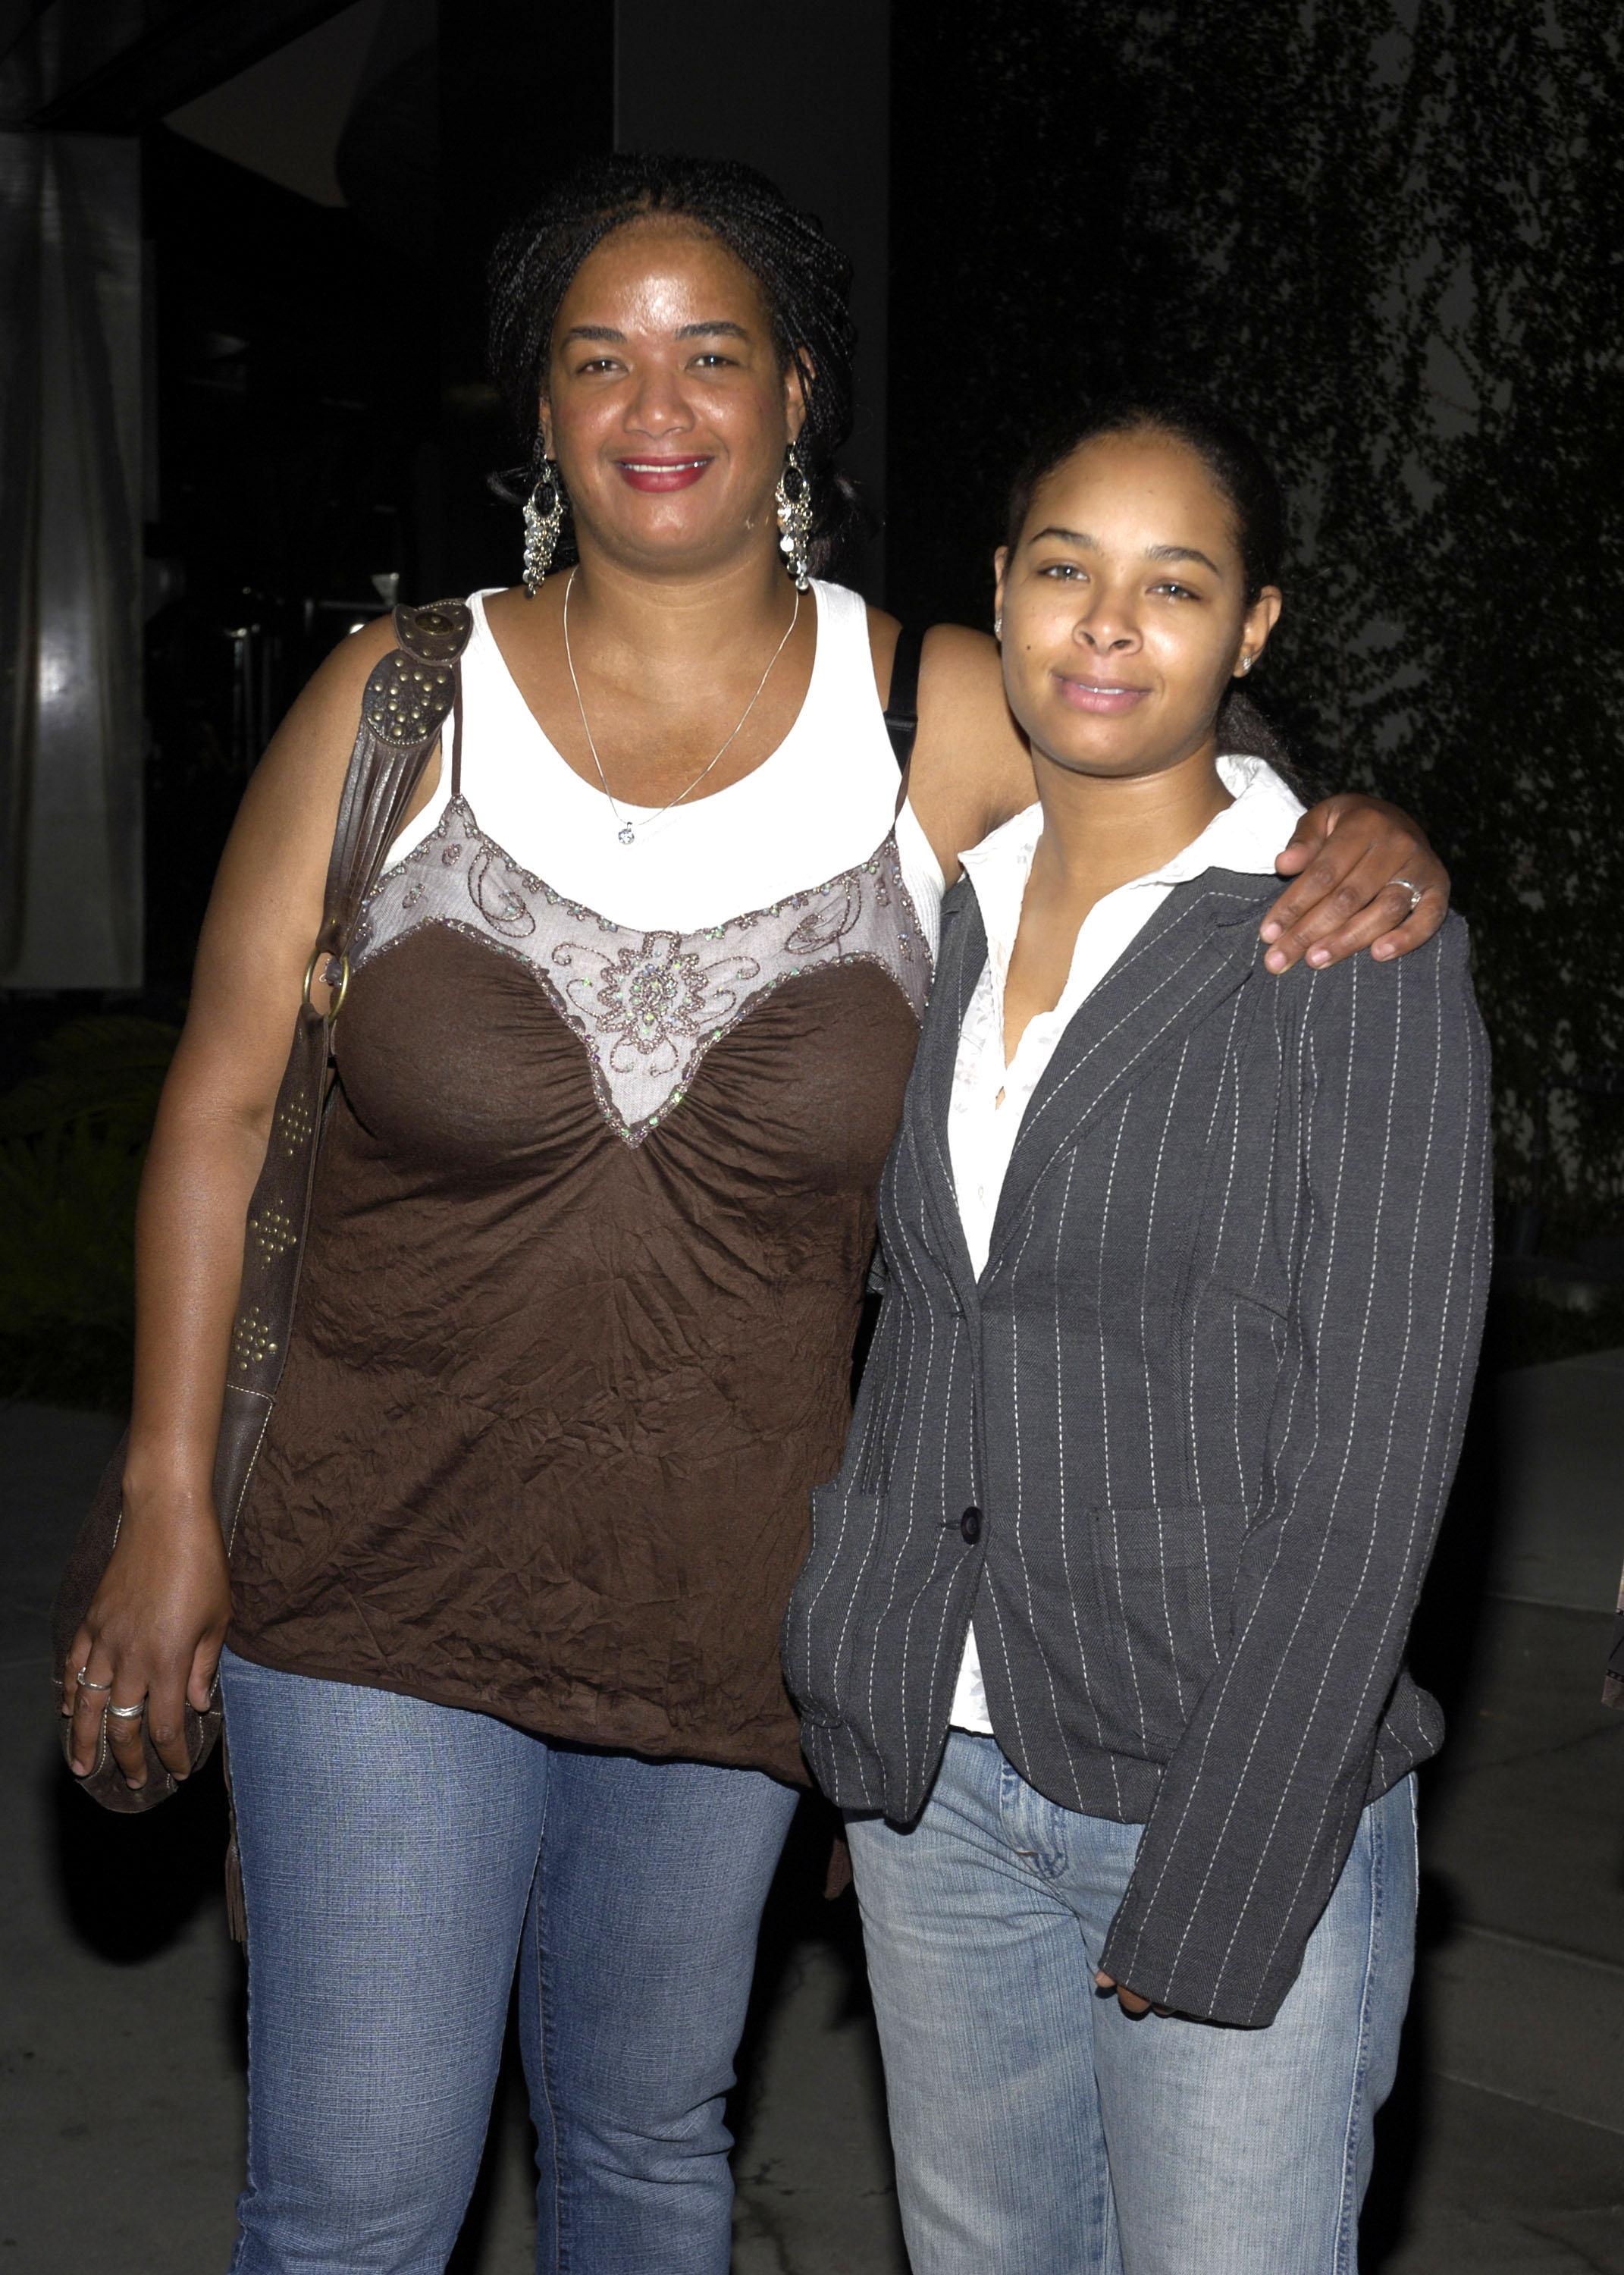 Elvira Wayans and Devonne Chaunté Wayans at the "The Last Meal" premiere at the Los Angeles International Short Film Festival on September 7, 2005, in Hollywood, California. | Source: Getty Images